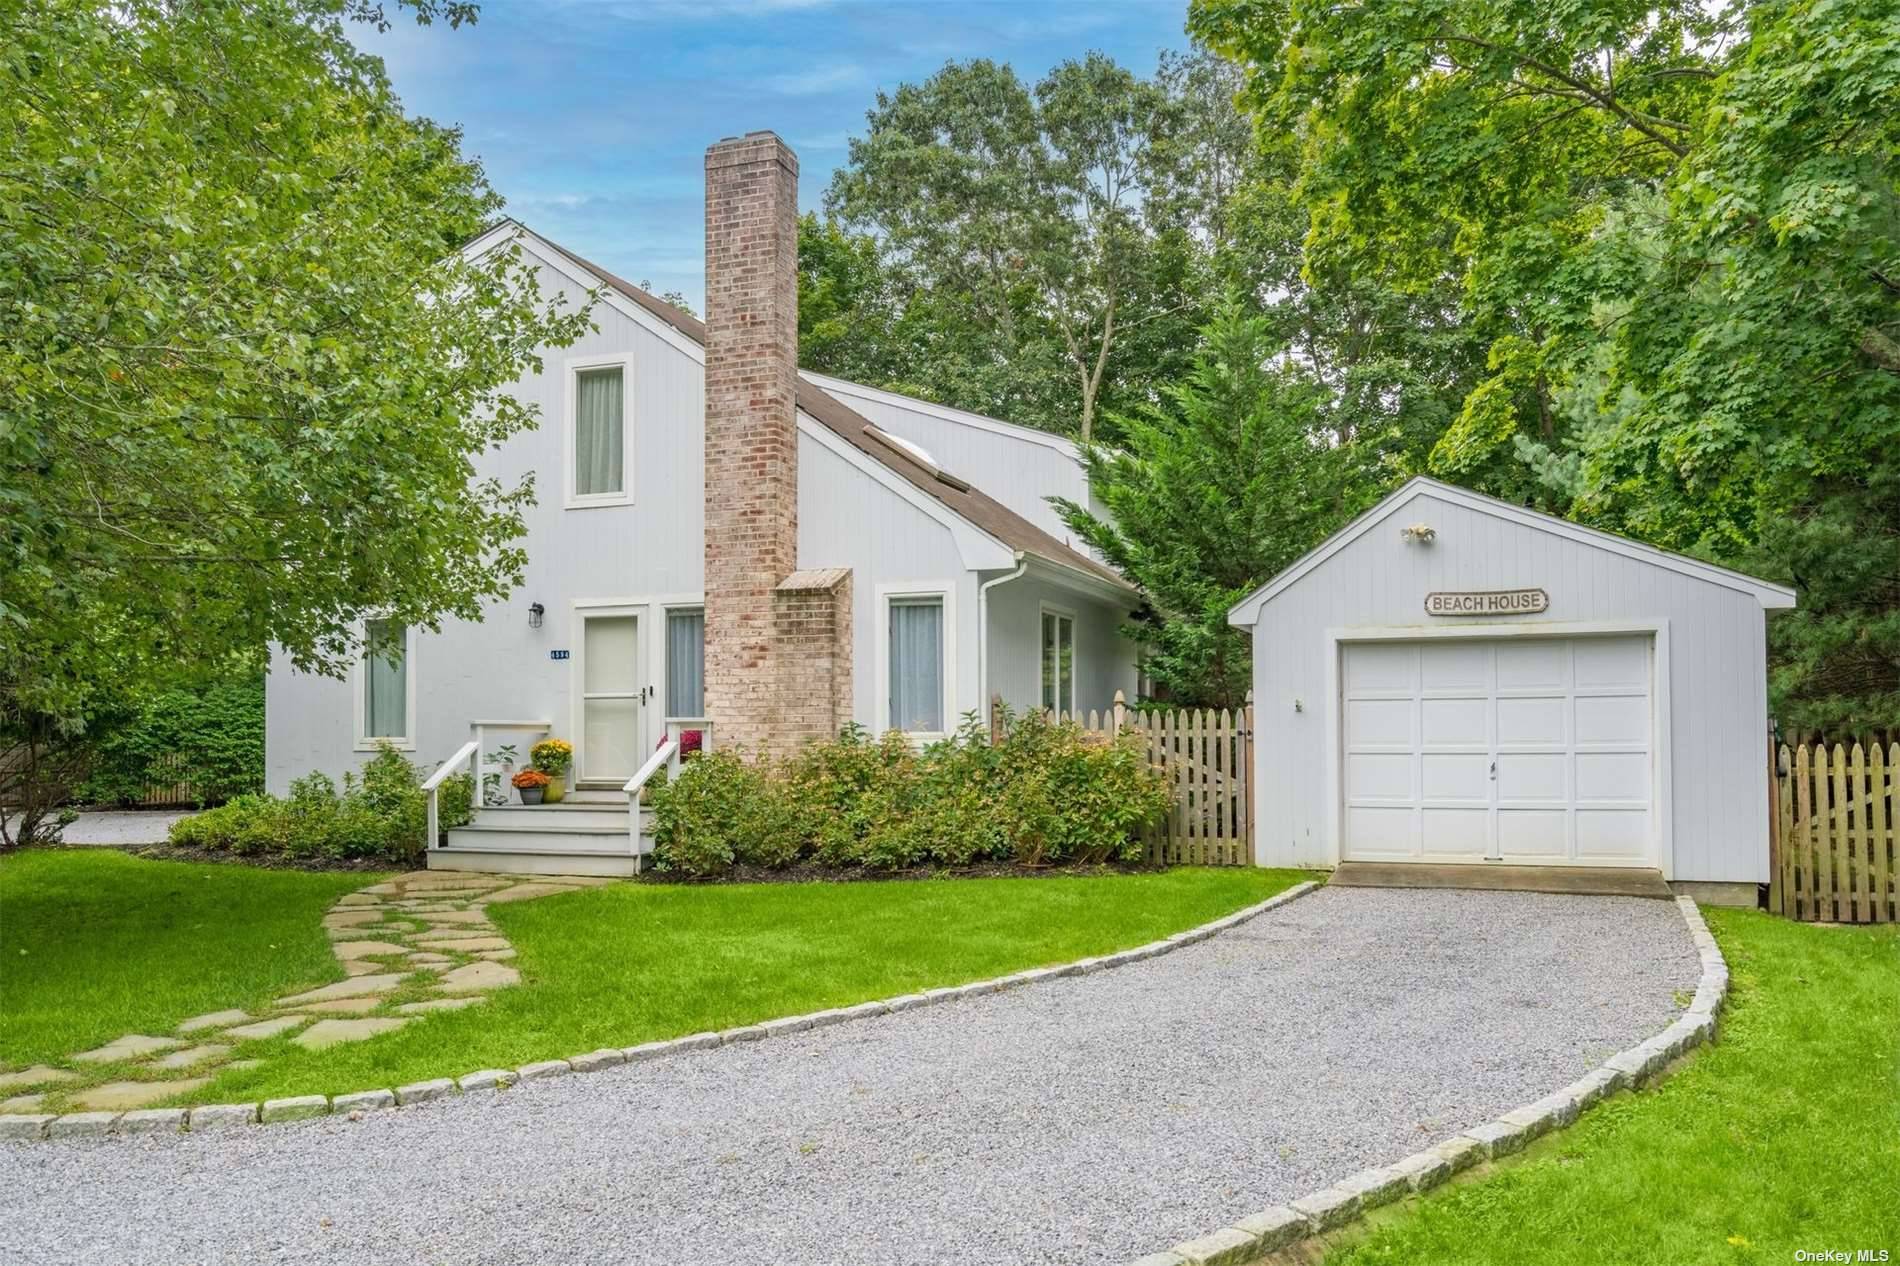 Whether you are in the market for a primary home, second home or rental property look no further than this beautifully updated Saltbox home within a mile to Sag Harbor ...